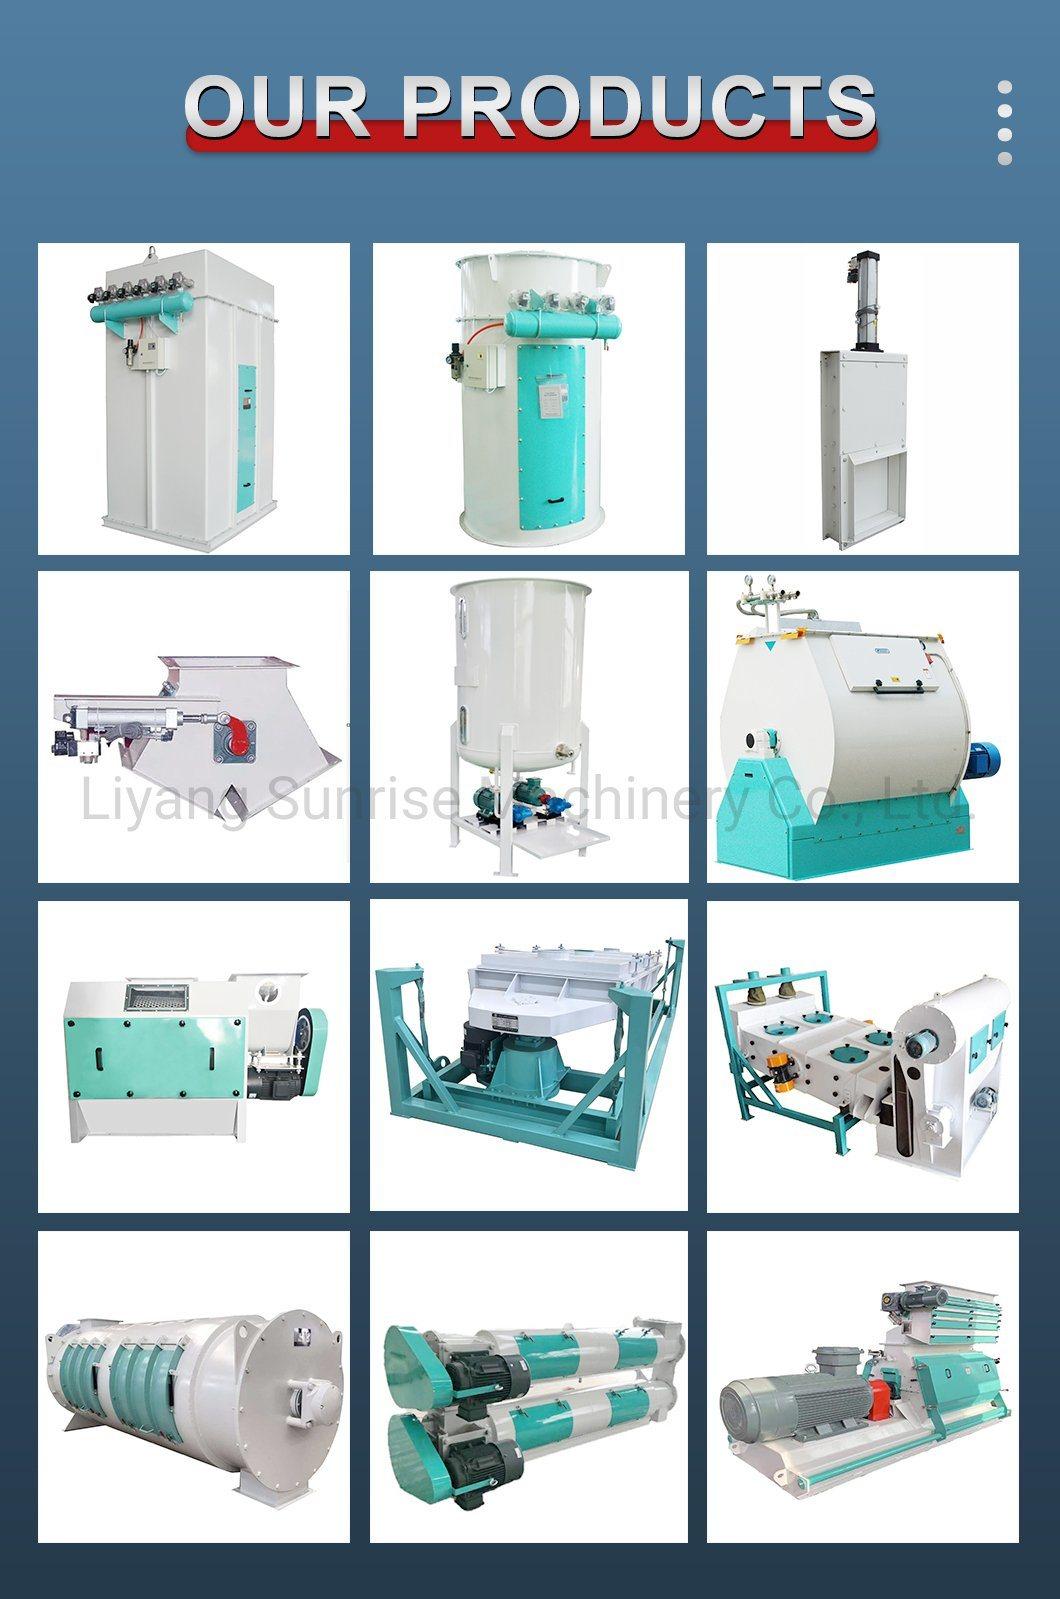 High Cost Performance and Stability Raw Material Processing Extruder for Sale